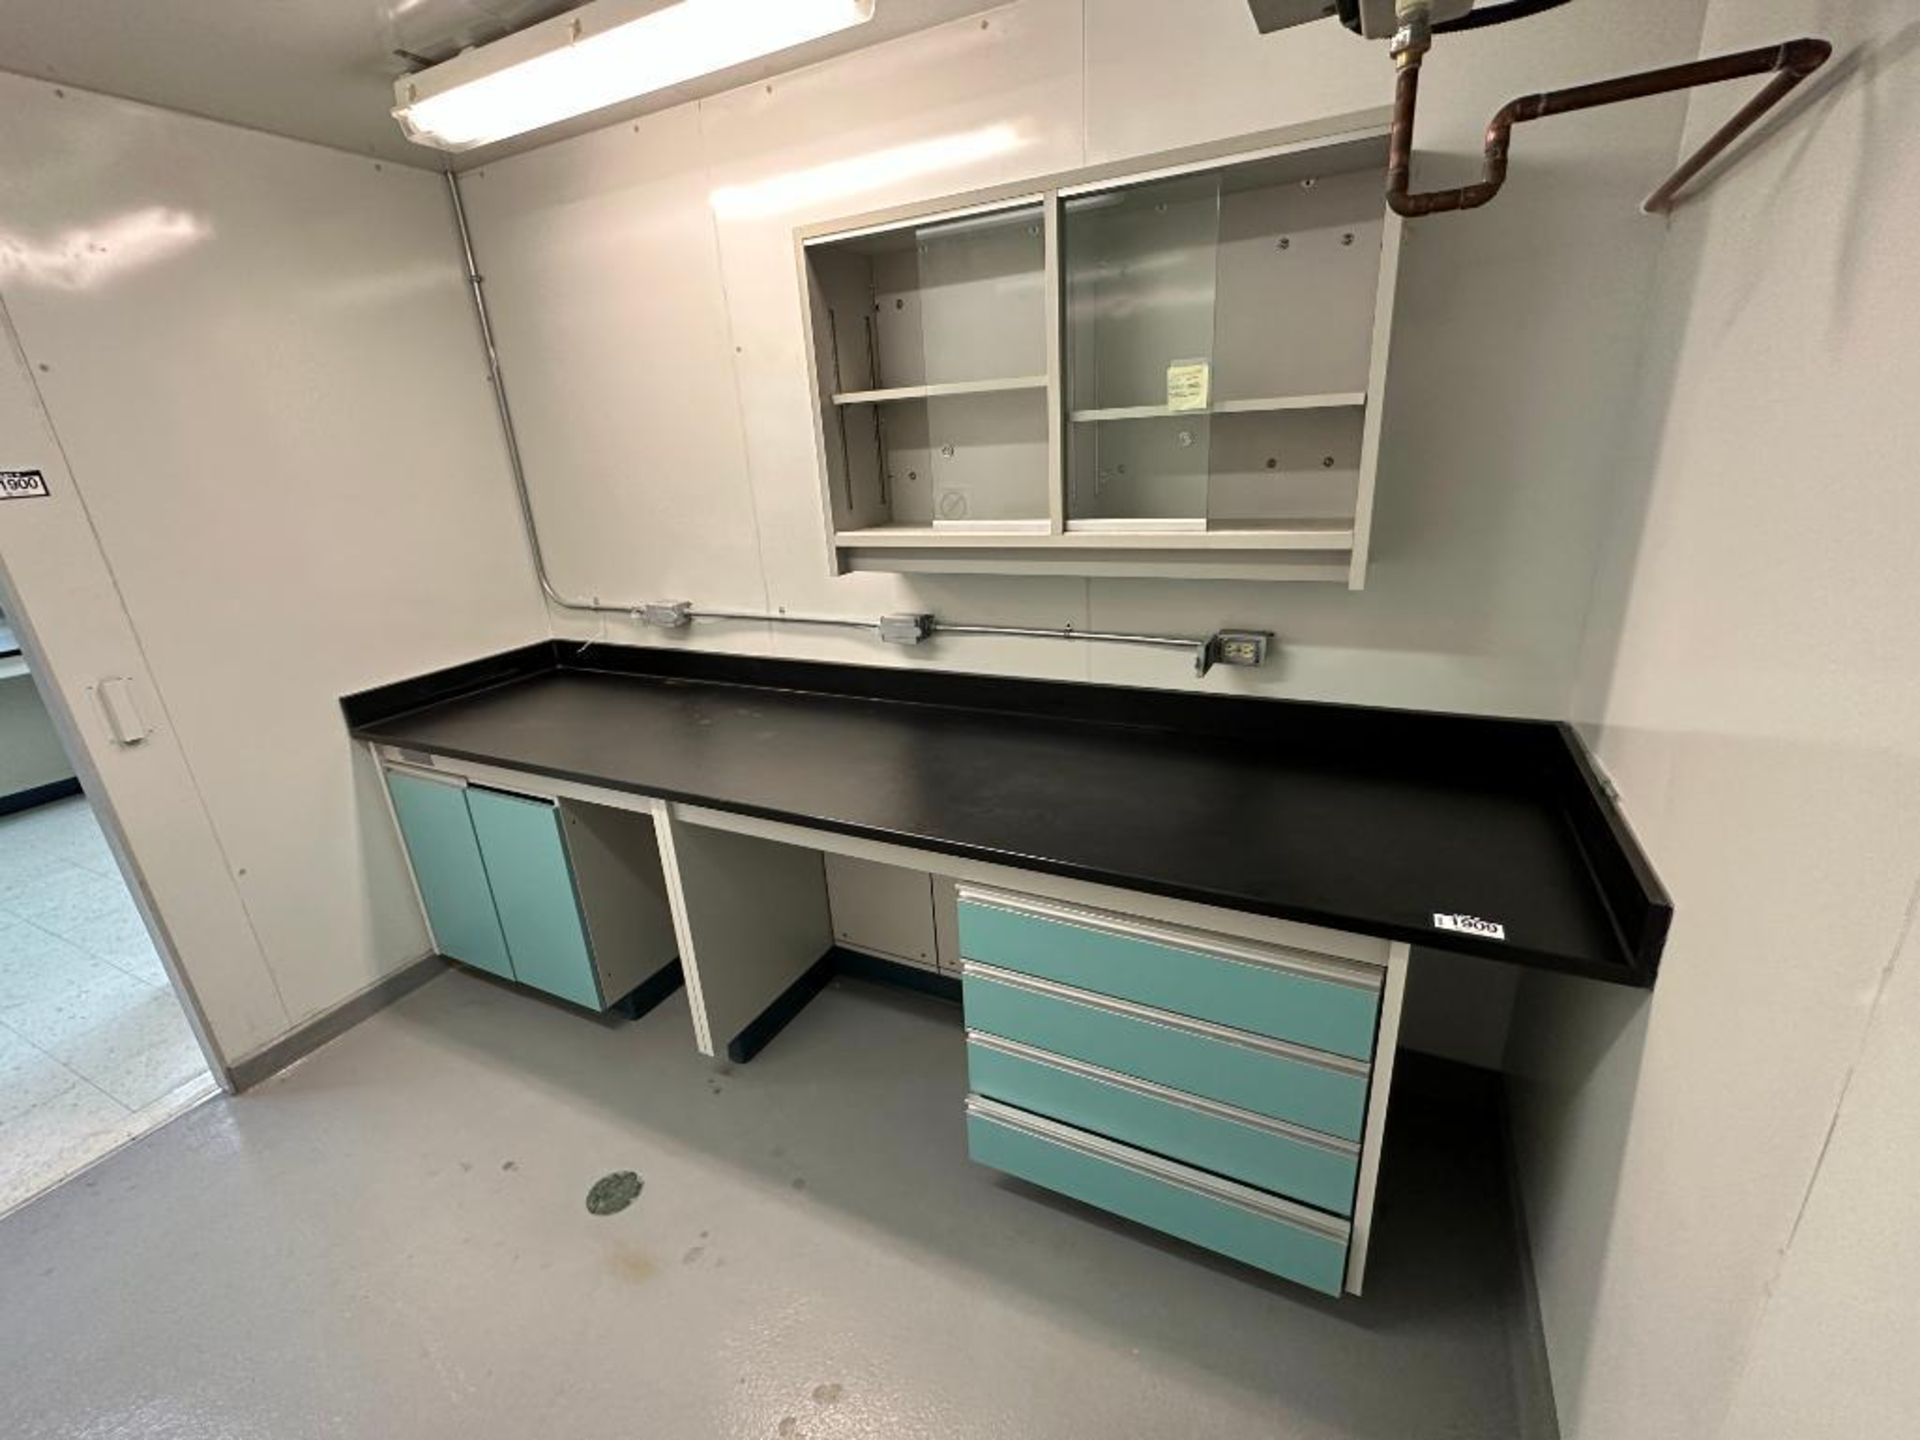 124" Laboratory Work Bench with 48" Wall Mounted Storage Cabinet - Image 3 of 3